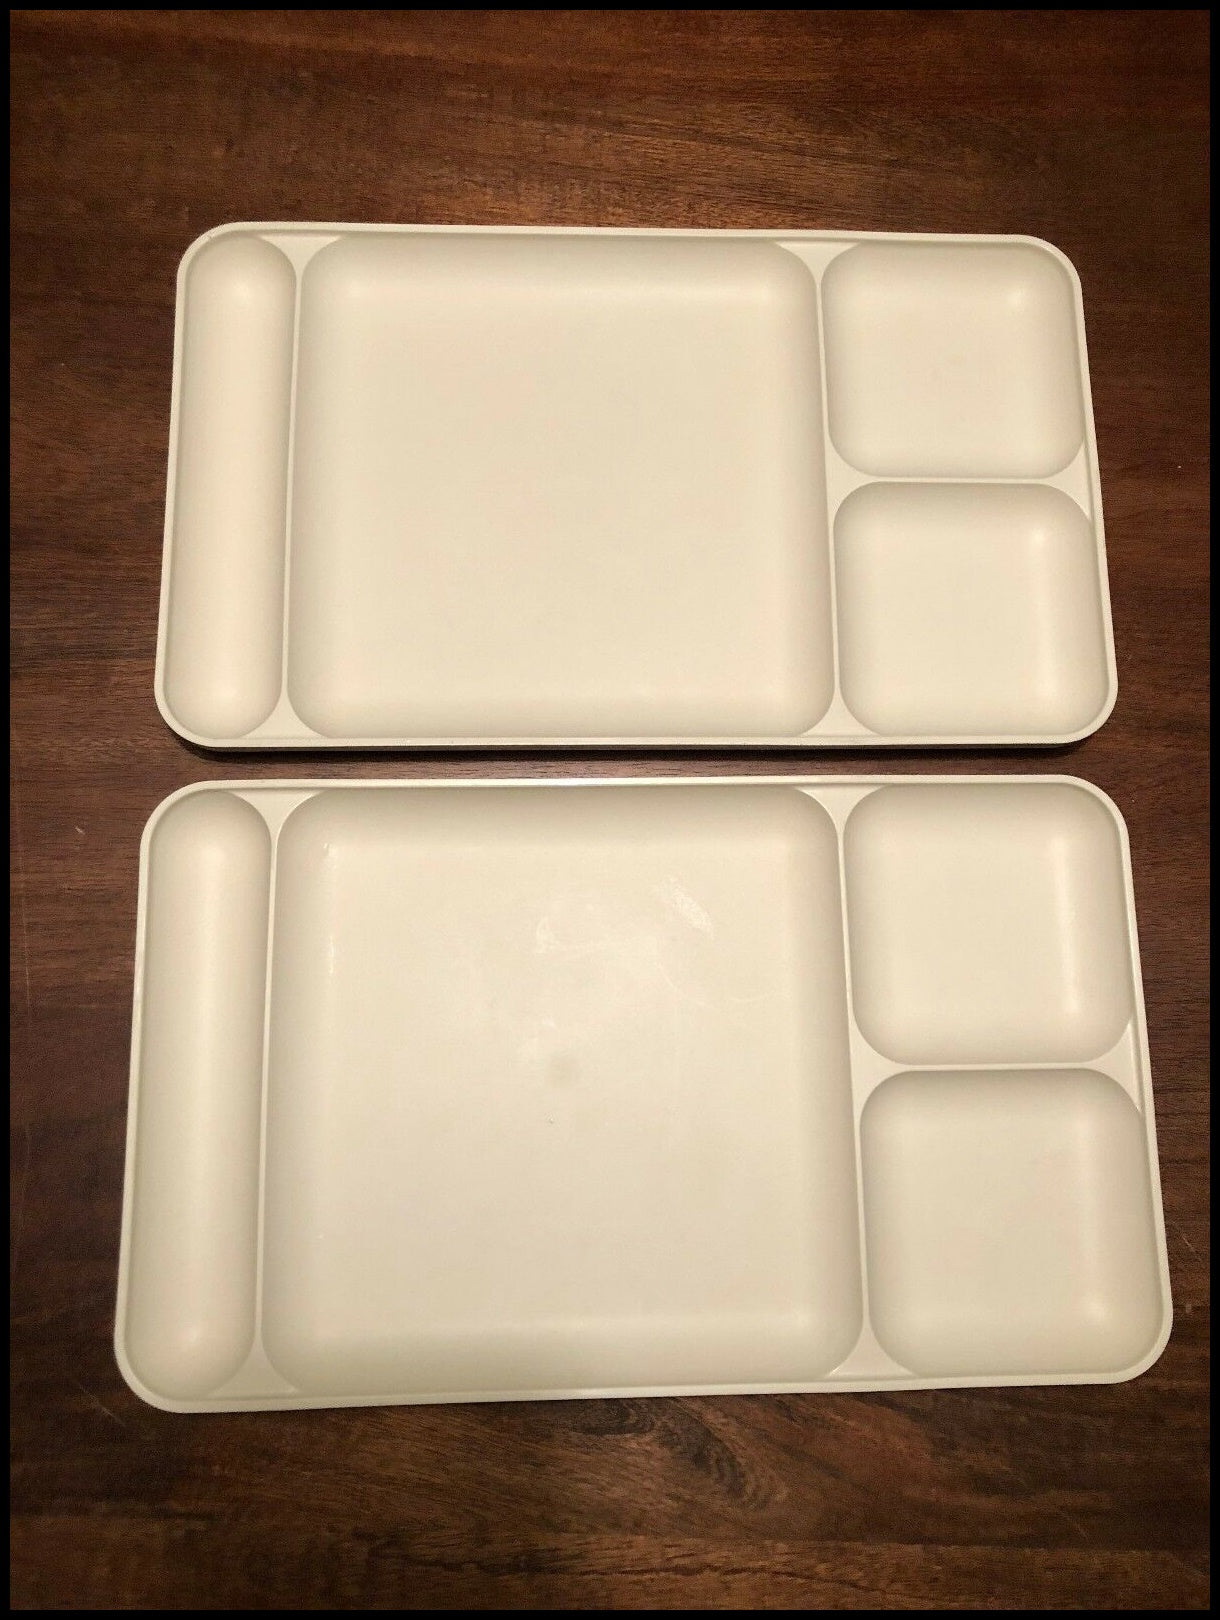 TUPPERWARE 2-Pc ALMOND IMPRESSIONS LARGE RECTANGLE DIVIDED DINING LUNCHEON TRAY SET